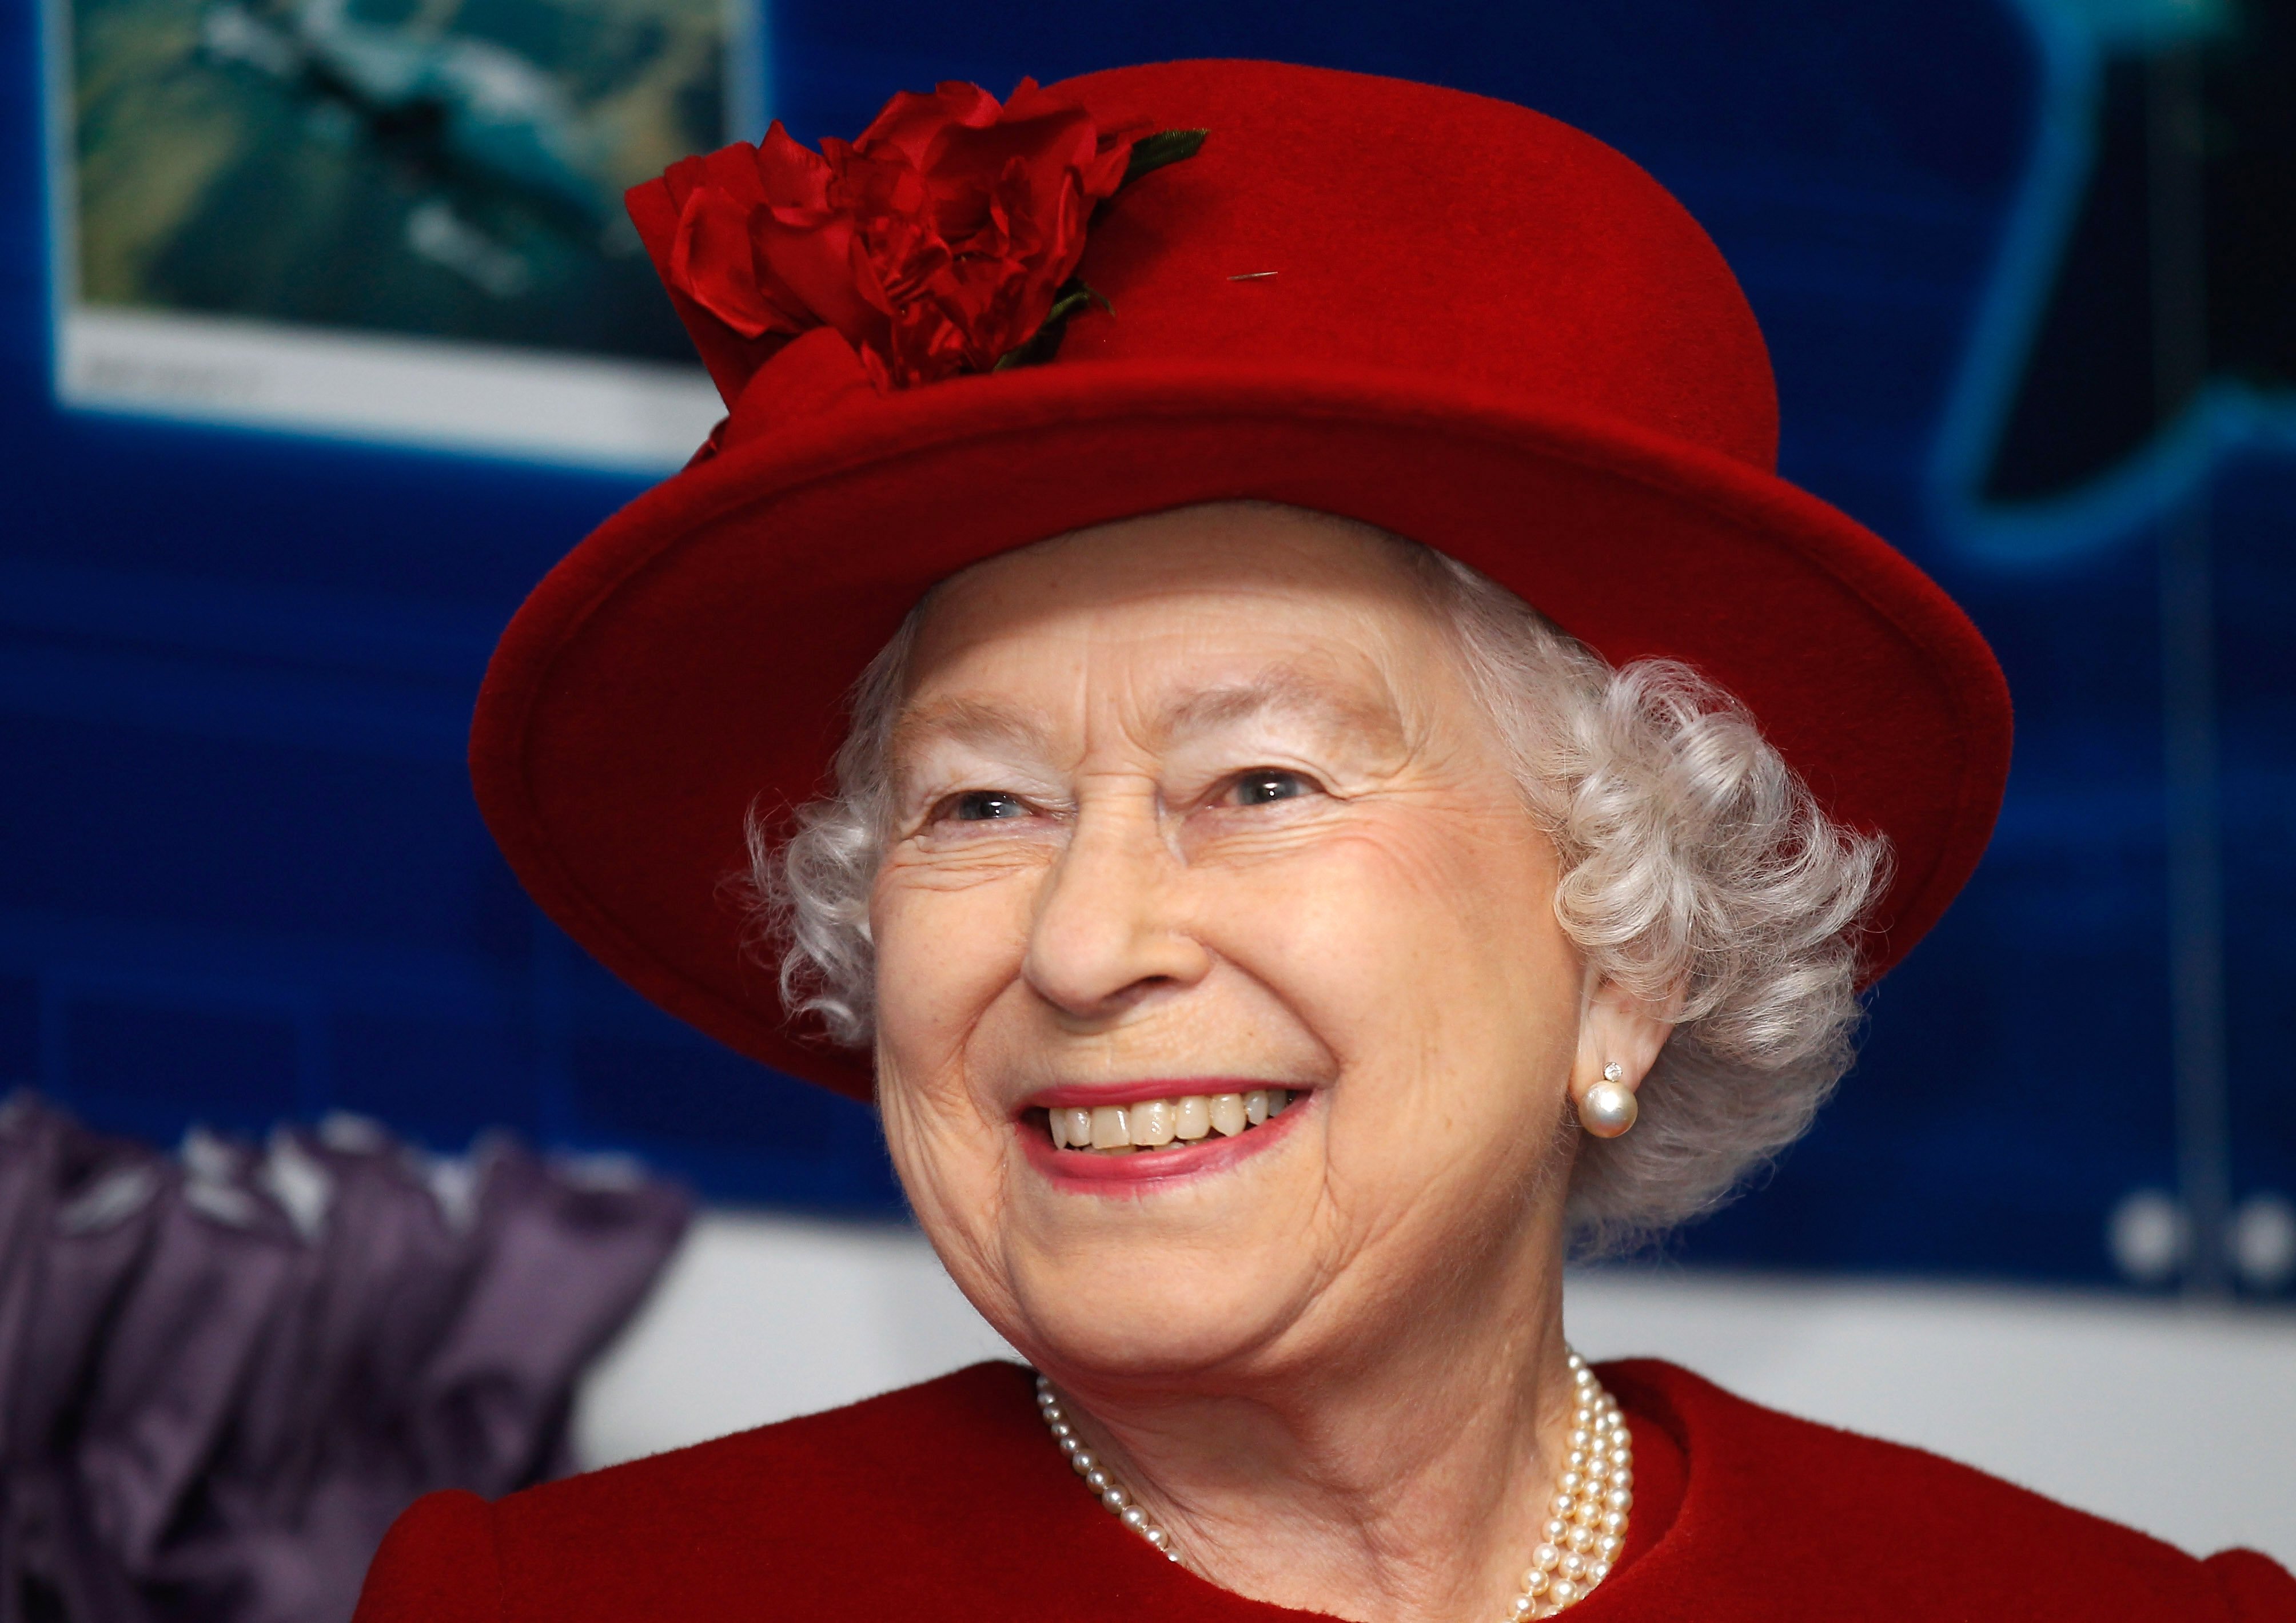 Queen Elizabeth II wearing red and smiling as she tours RAF Valley